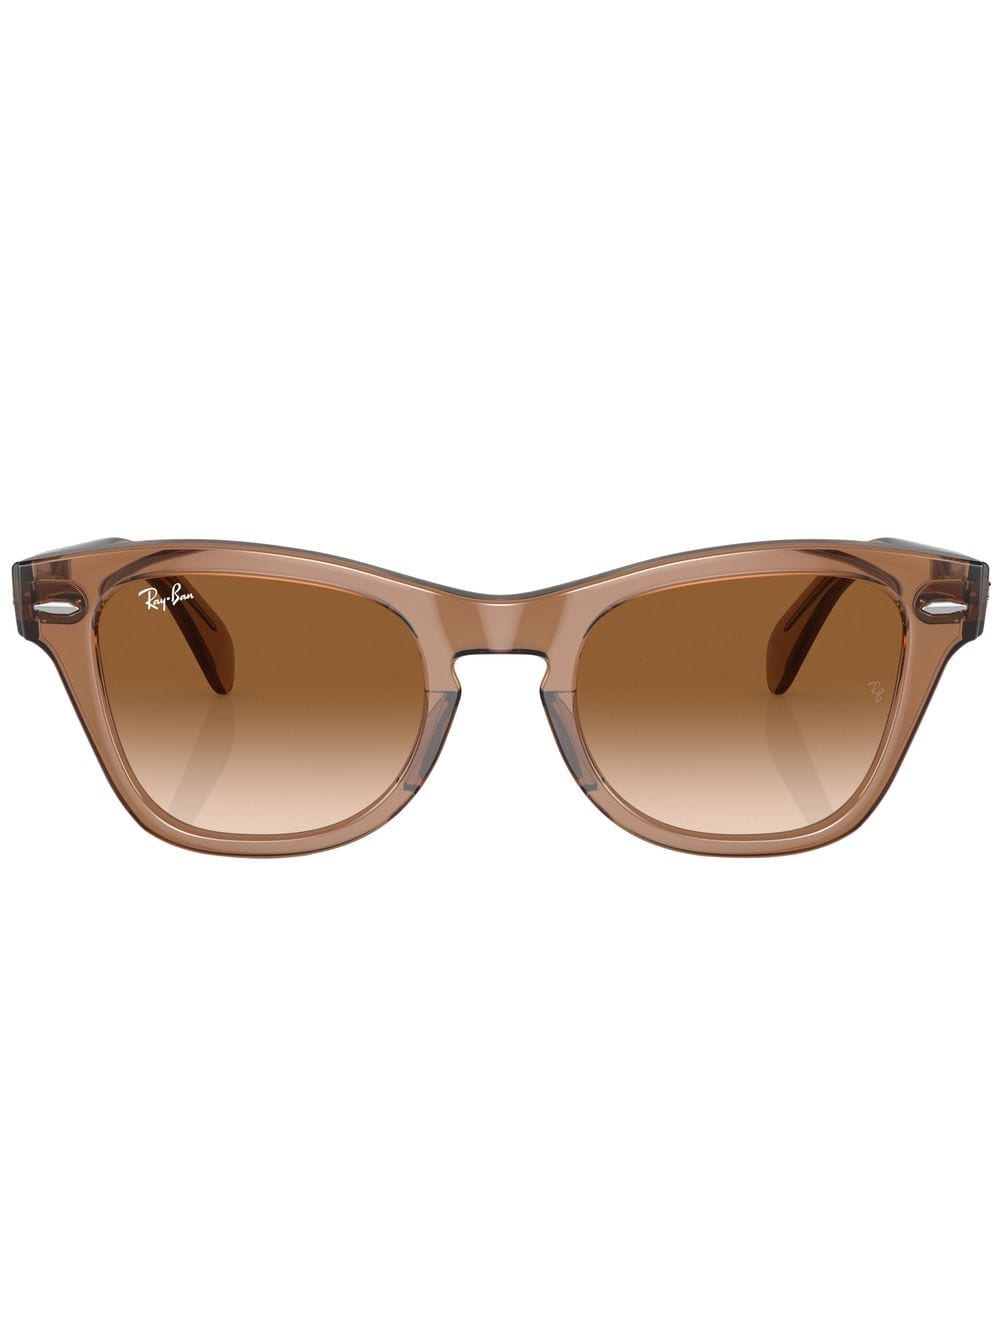 Ray-Ban square-frame gradient-lens sunglasses - Brown von Ray-Ban